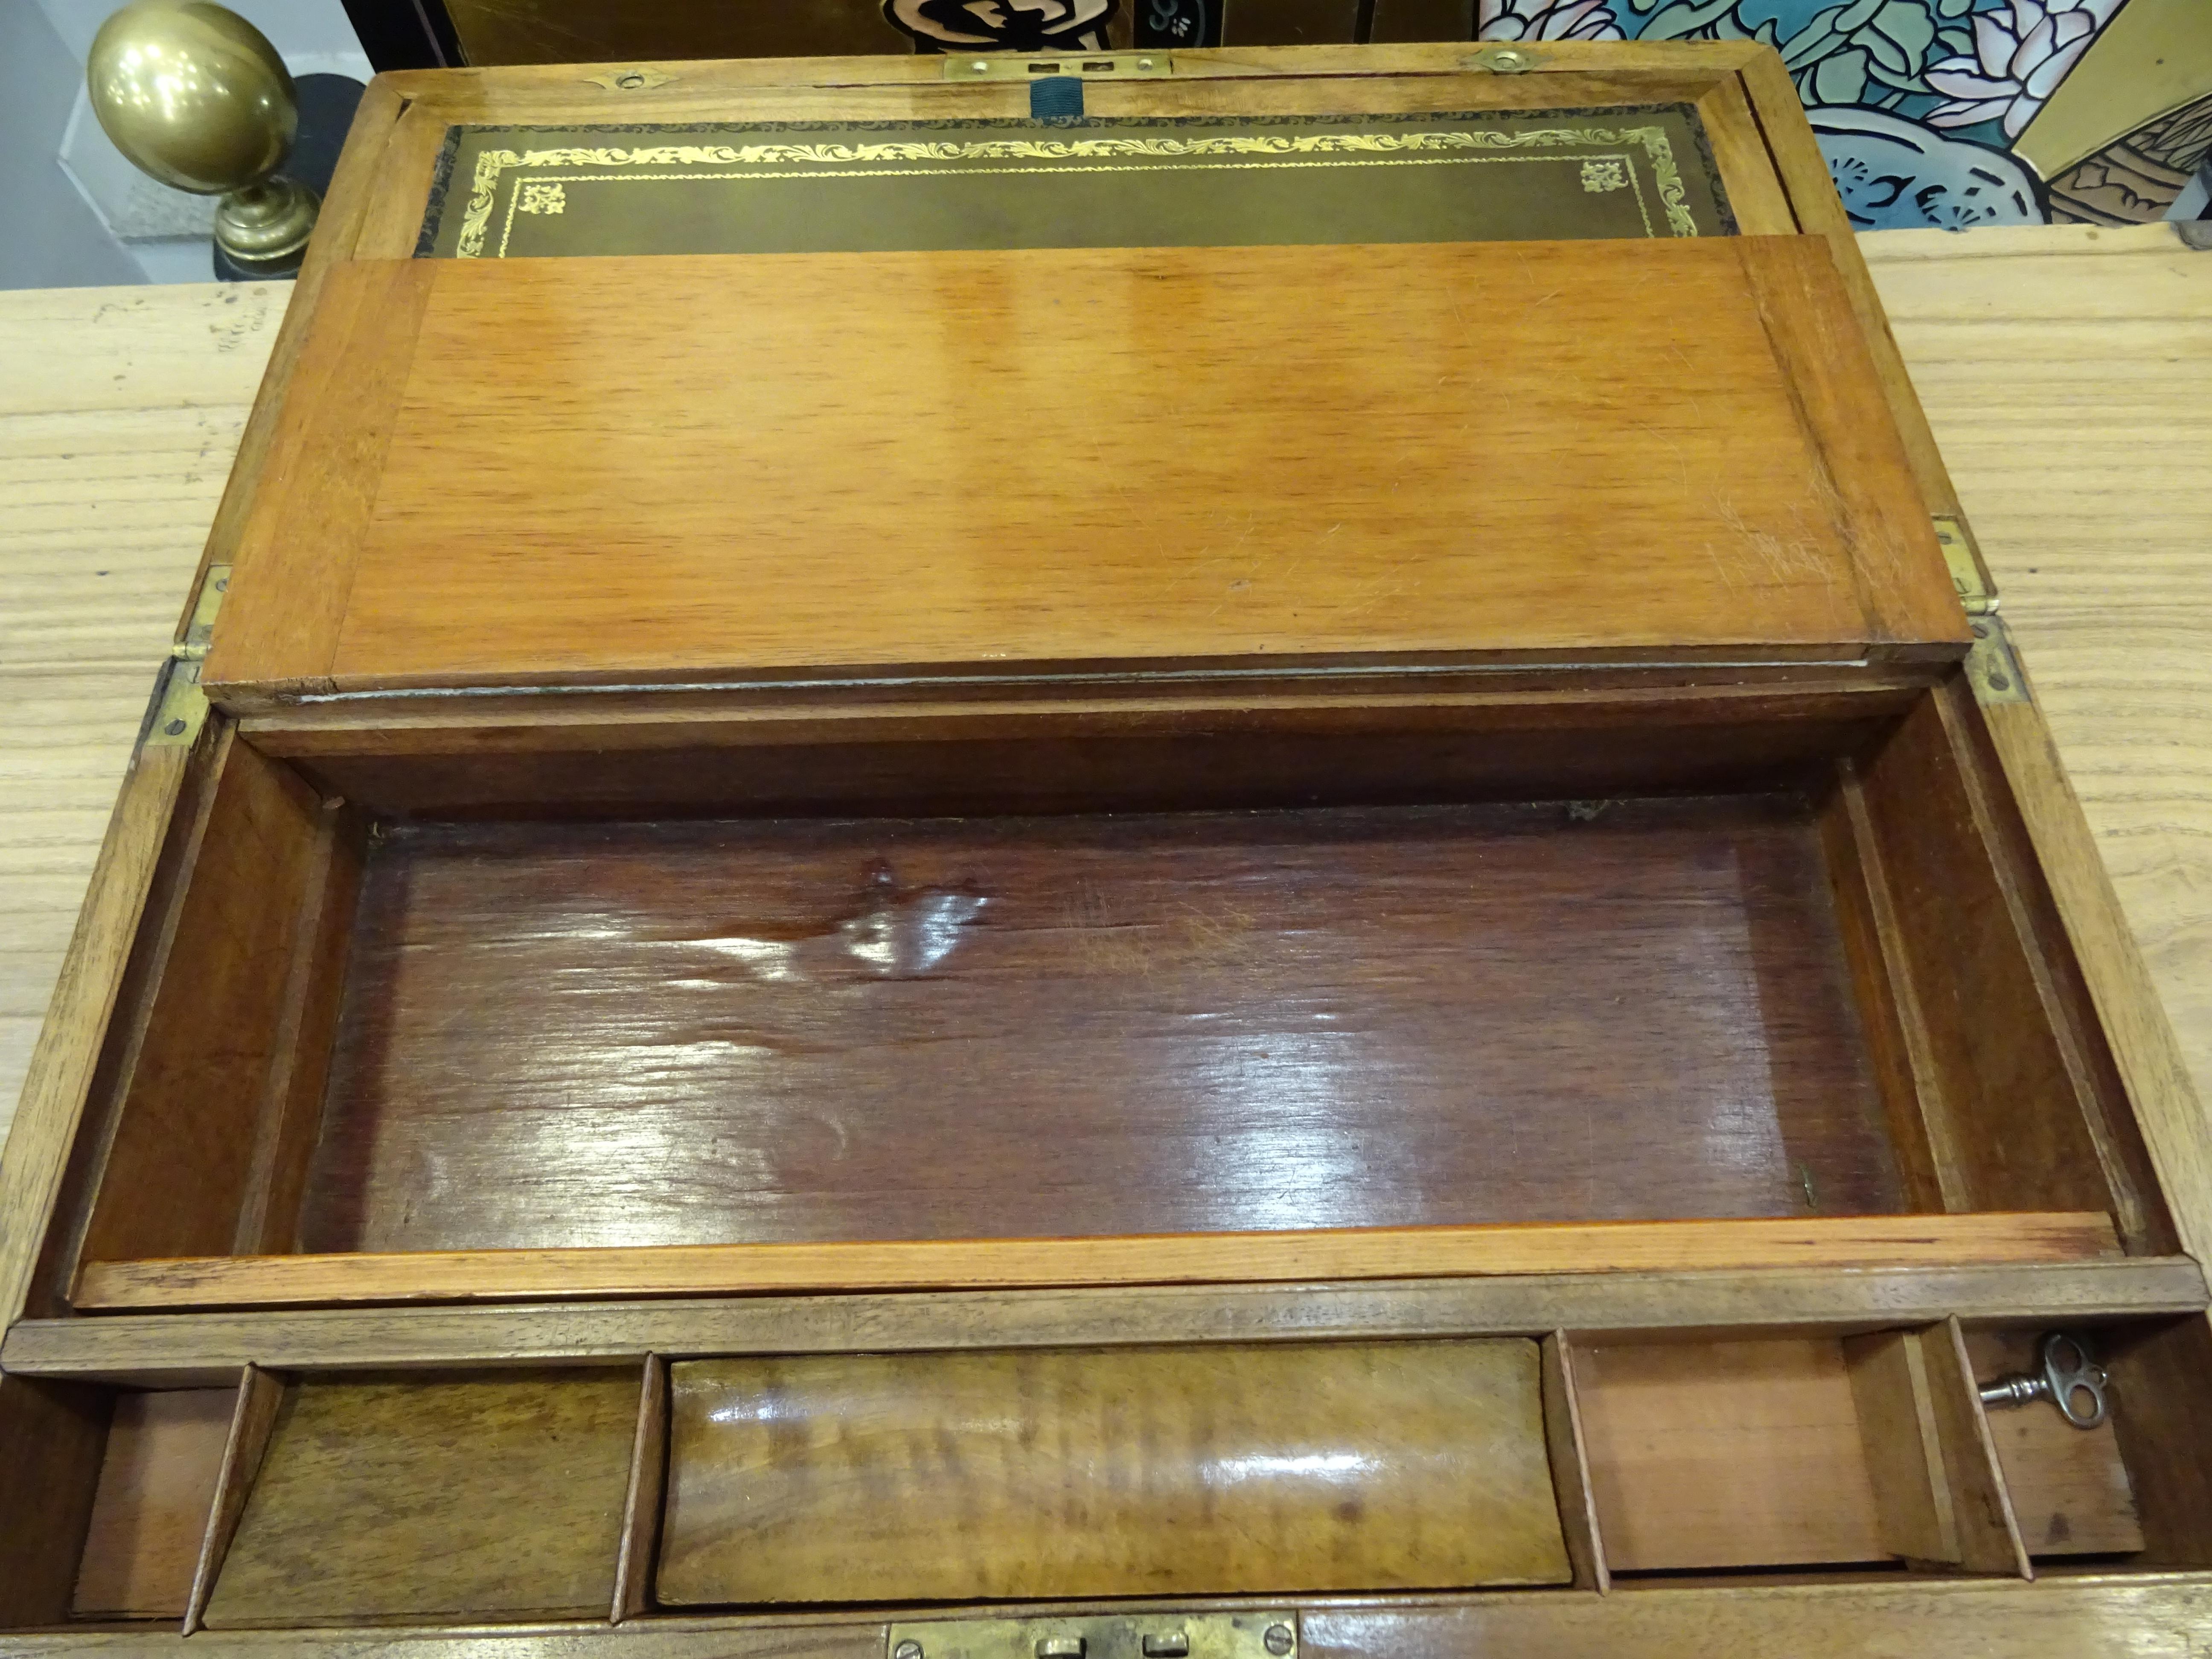 19th Century English Boat Desk-Box, Inlaid Wood and Mother of Pearl 4